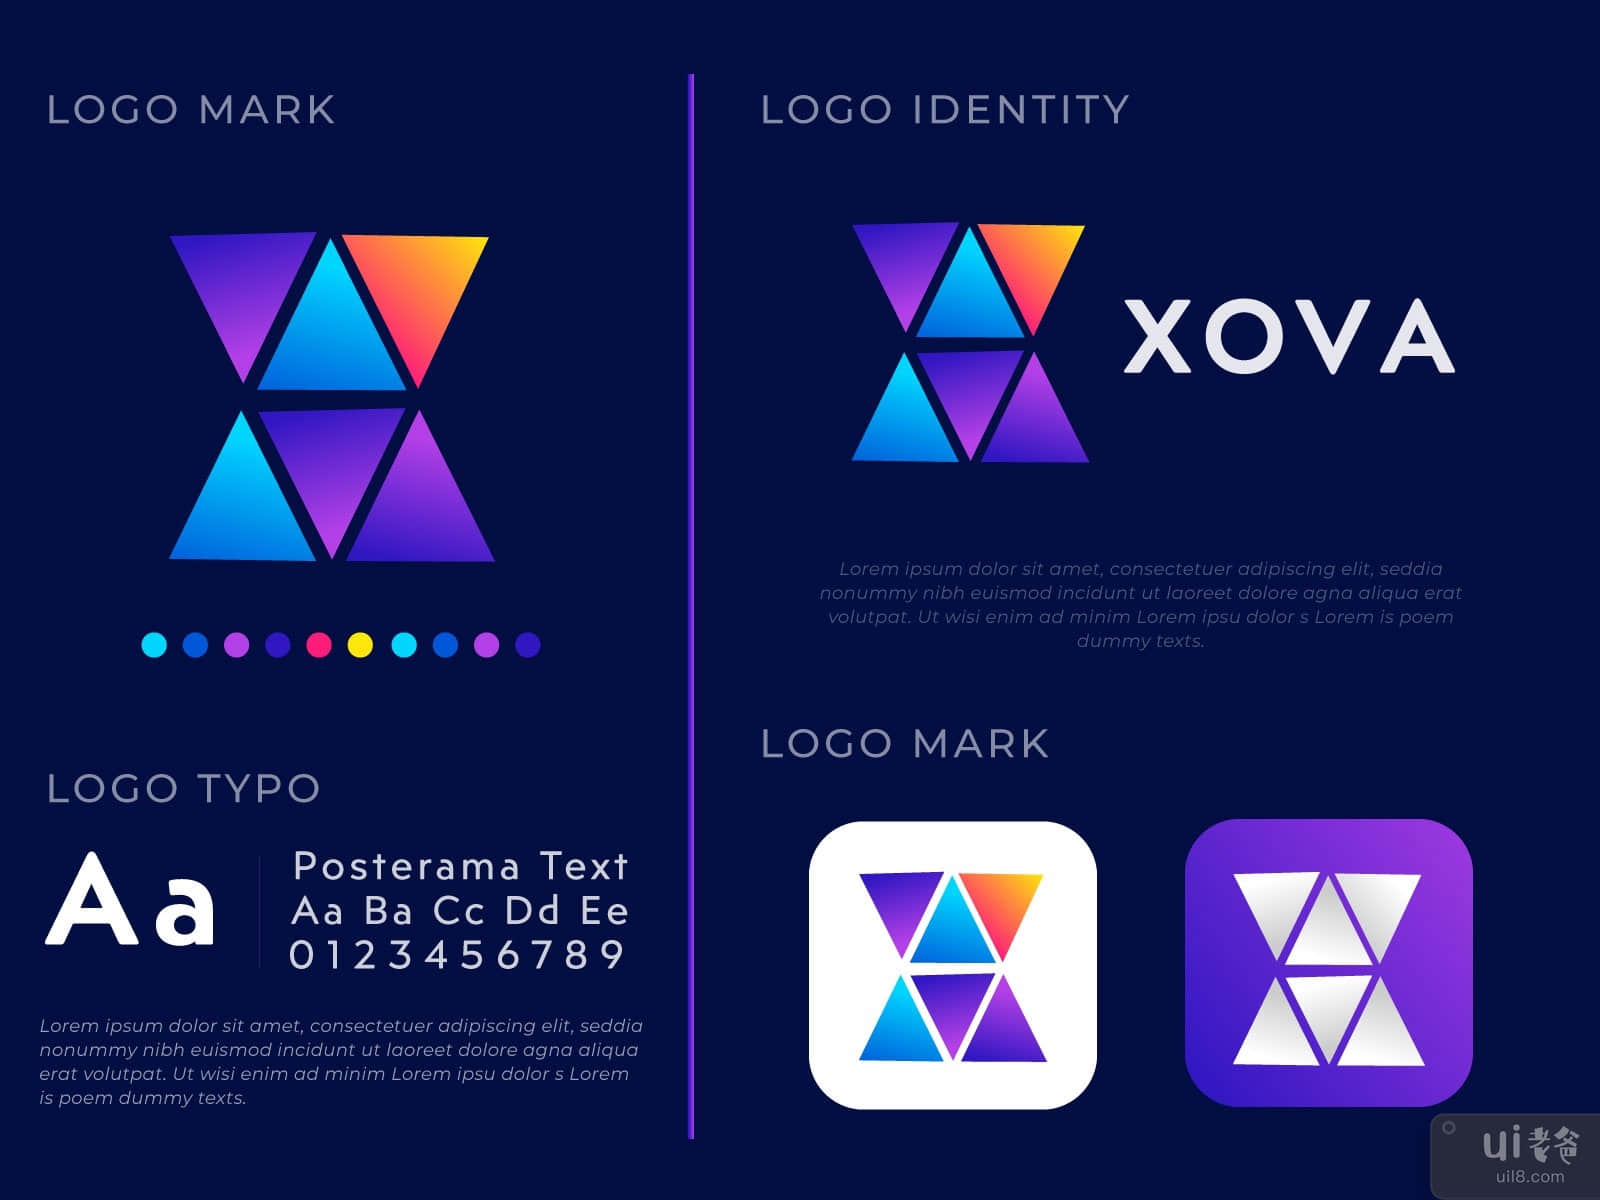 Abstract X Latter Logo designs For App XOVA 2nd Concept 